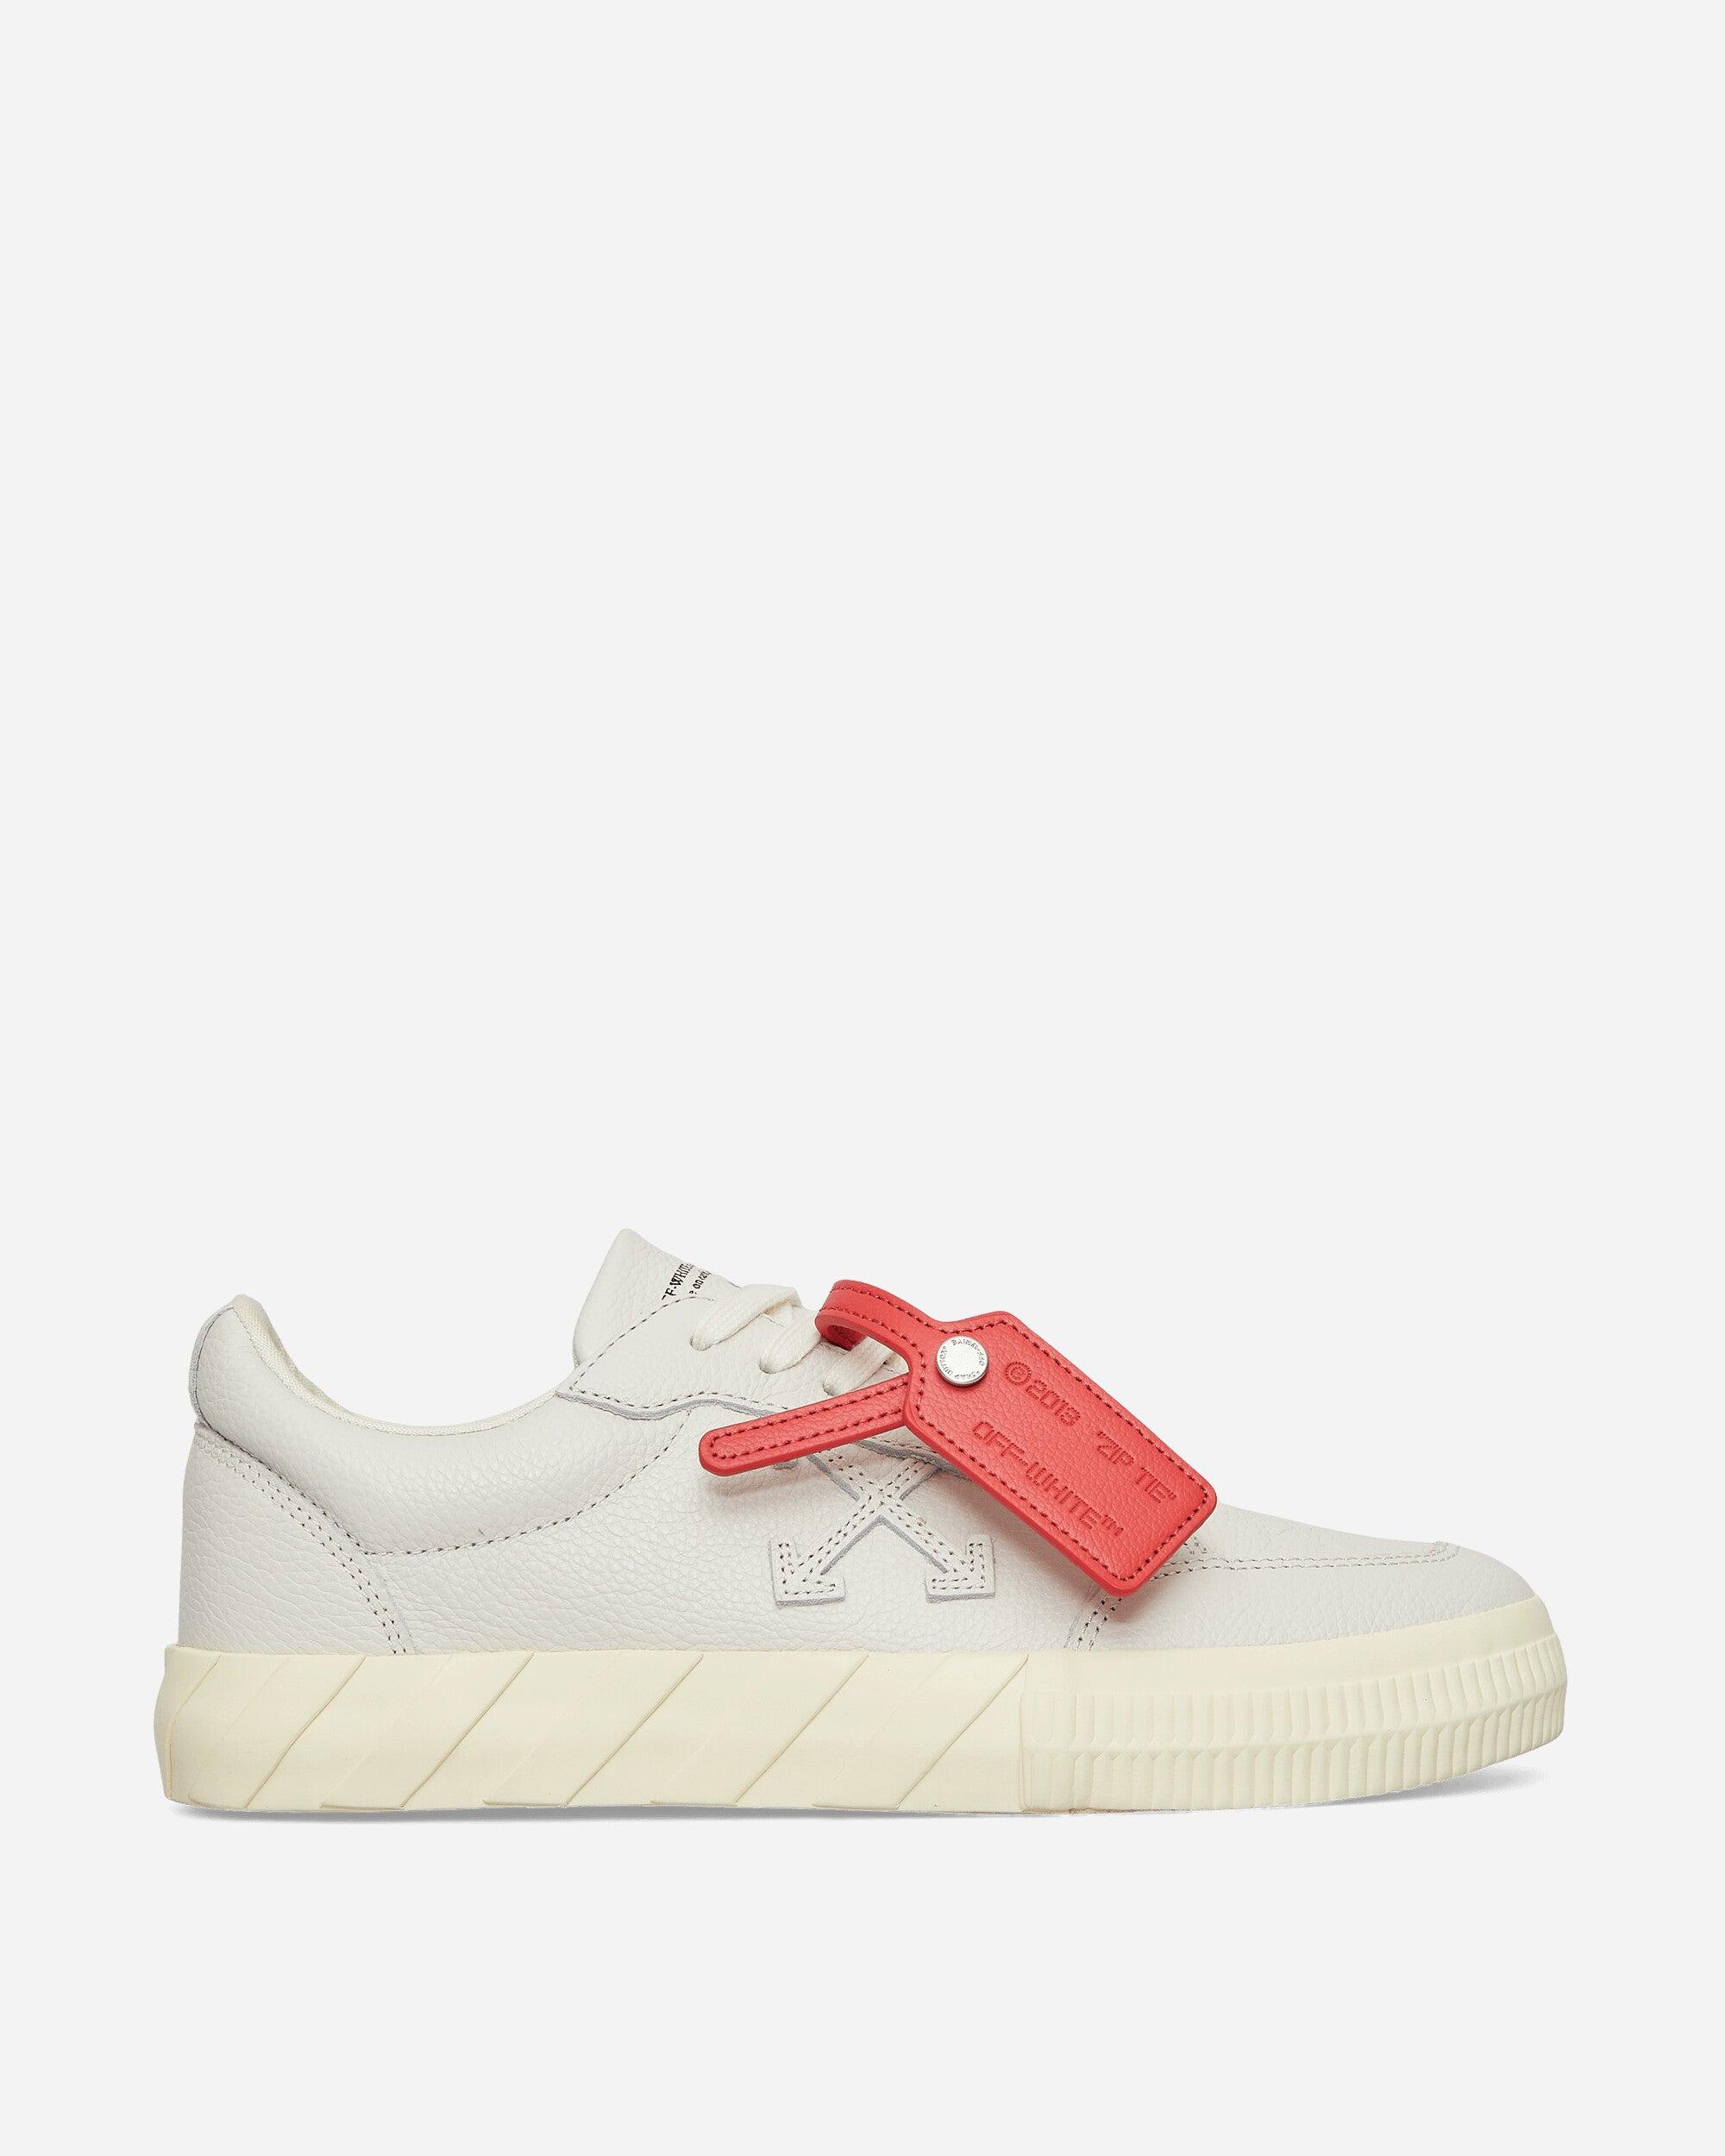 NEW OFF-WHITE C/O VIRGIL ABLOH White Leather 2.0 Sneakers Size 11